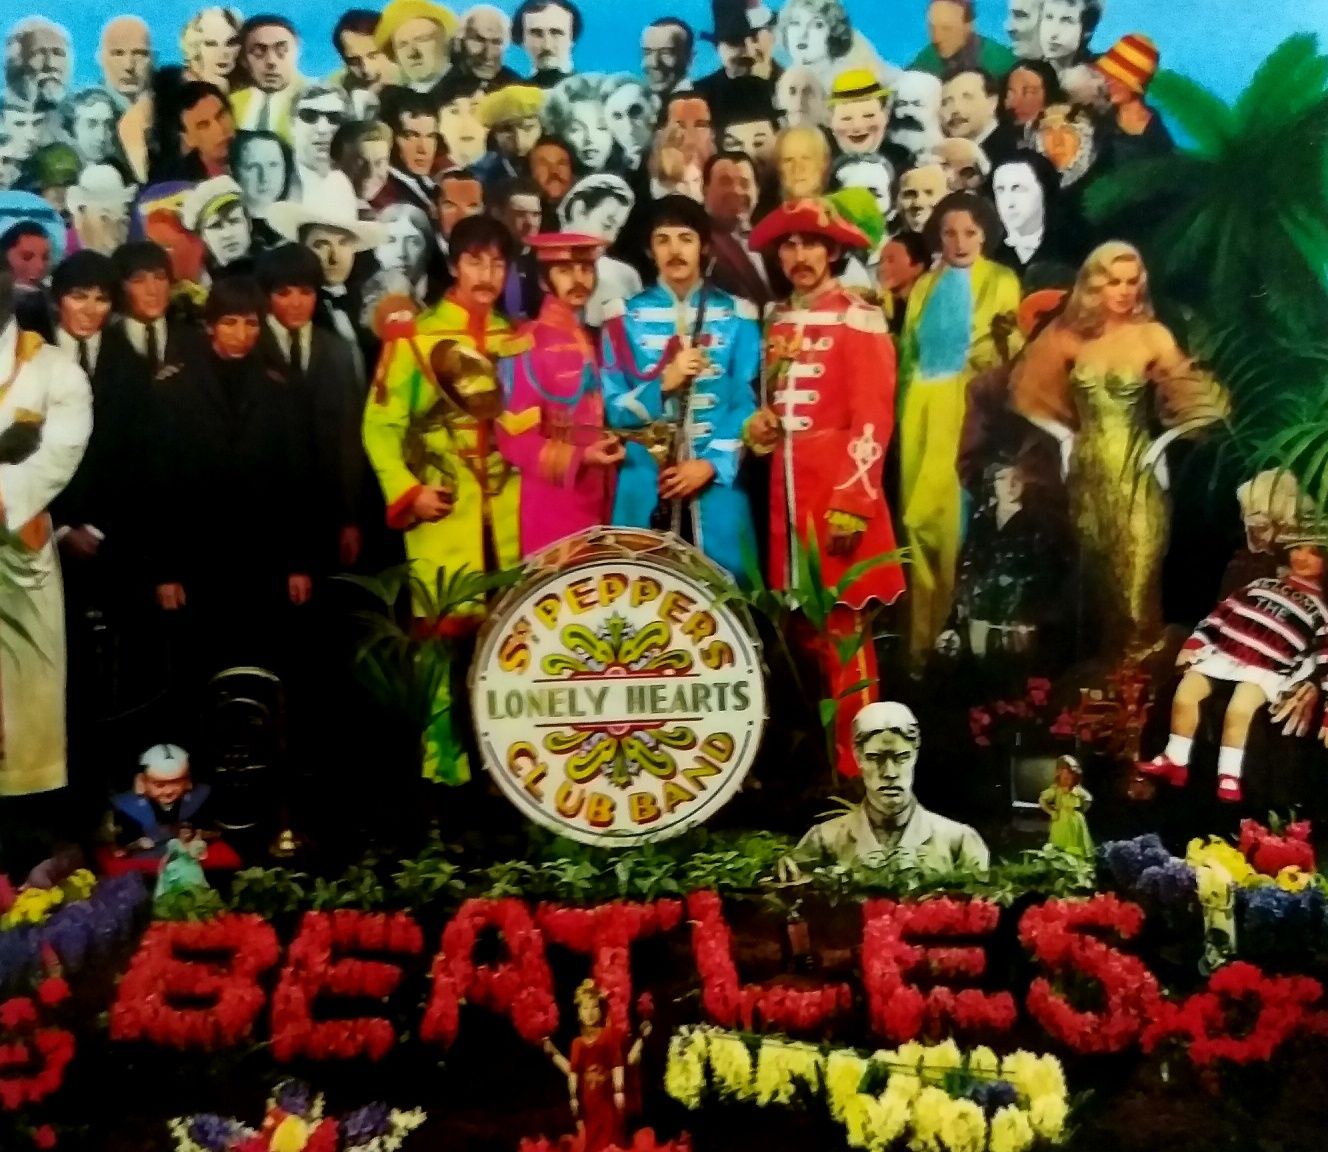 The Beatles Sgt. Pepper's Lonely Hearts Club Band 1987r